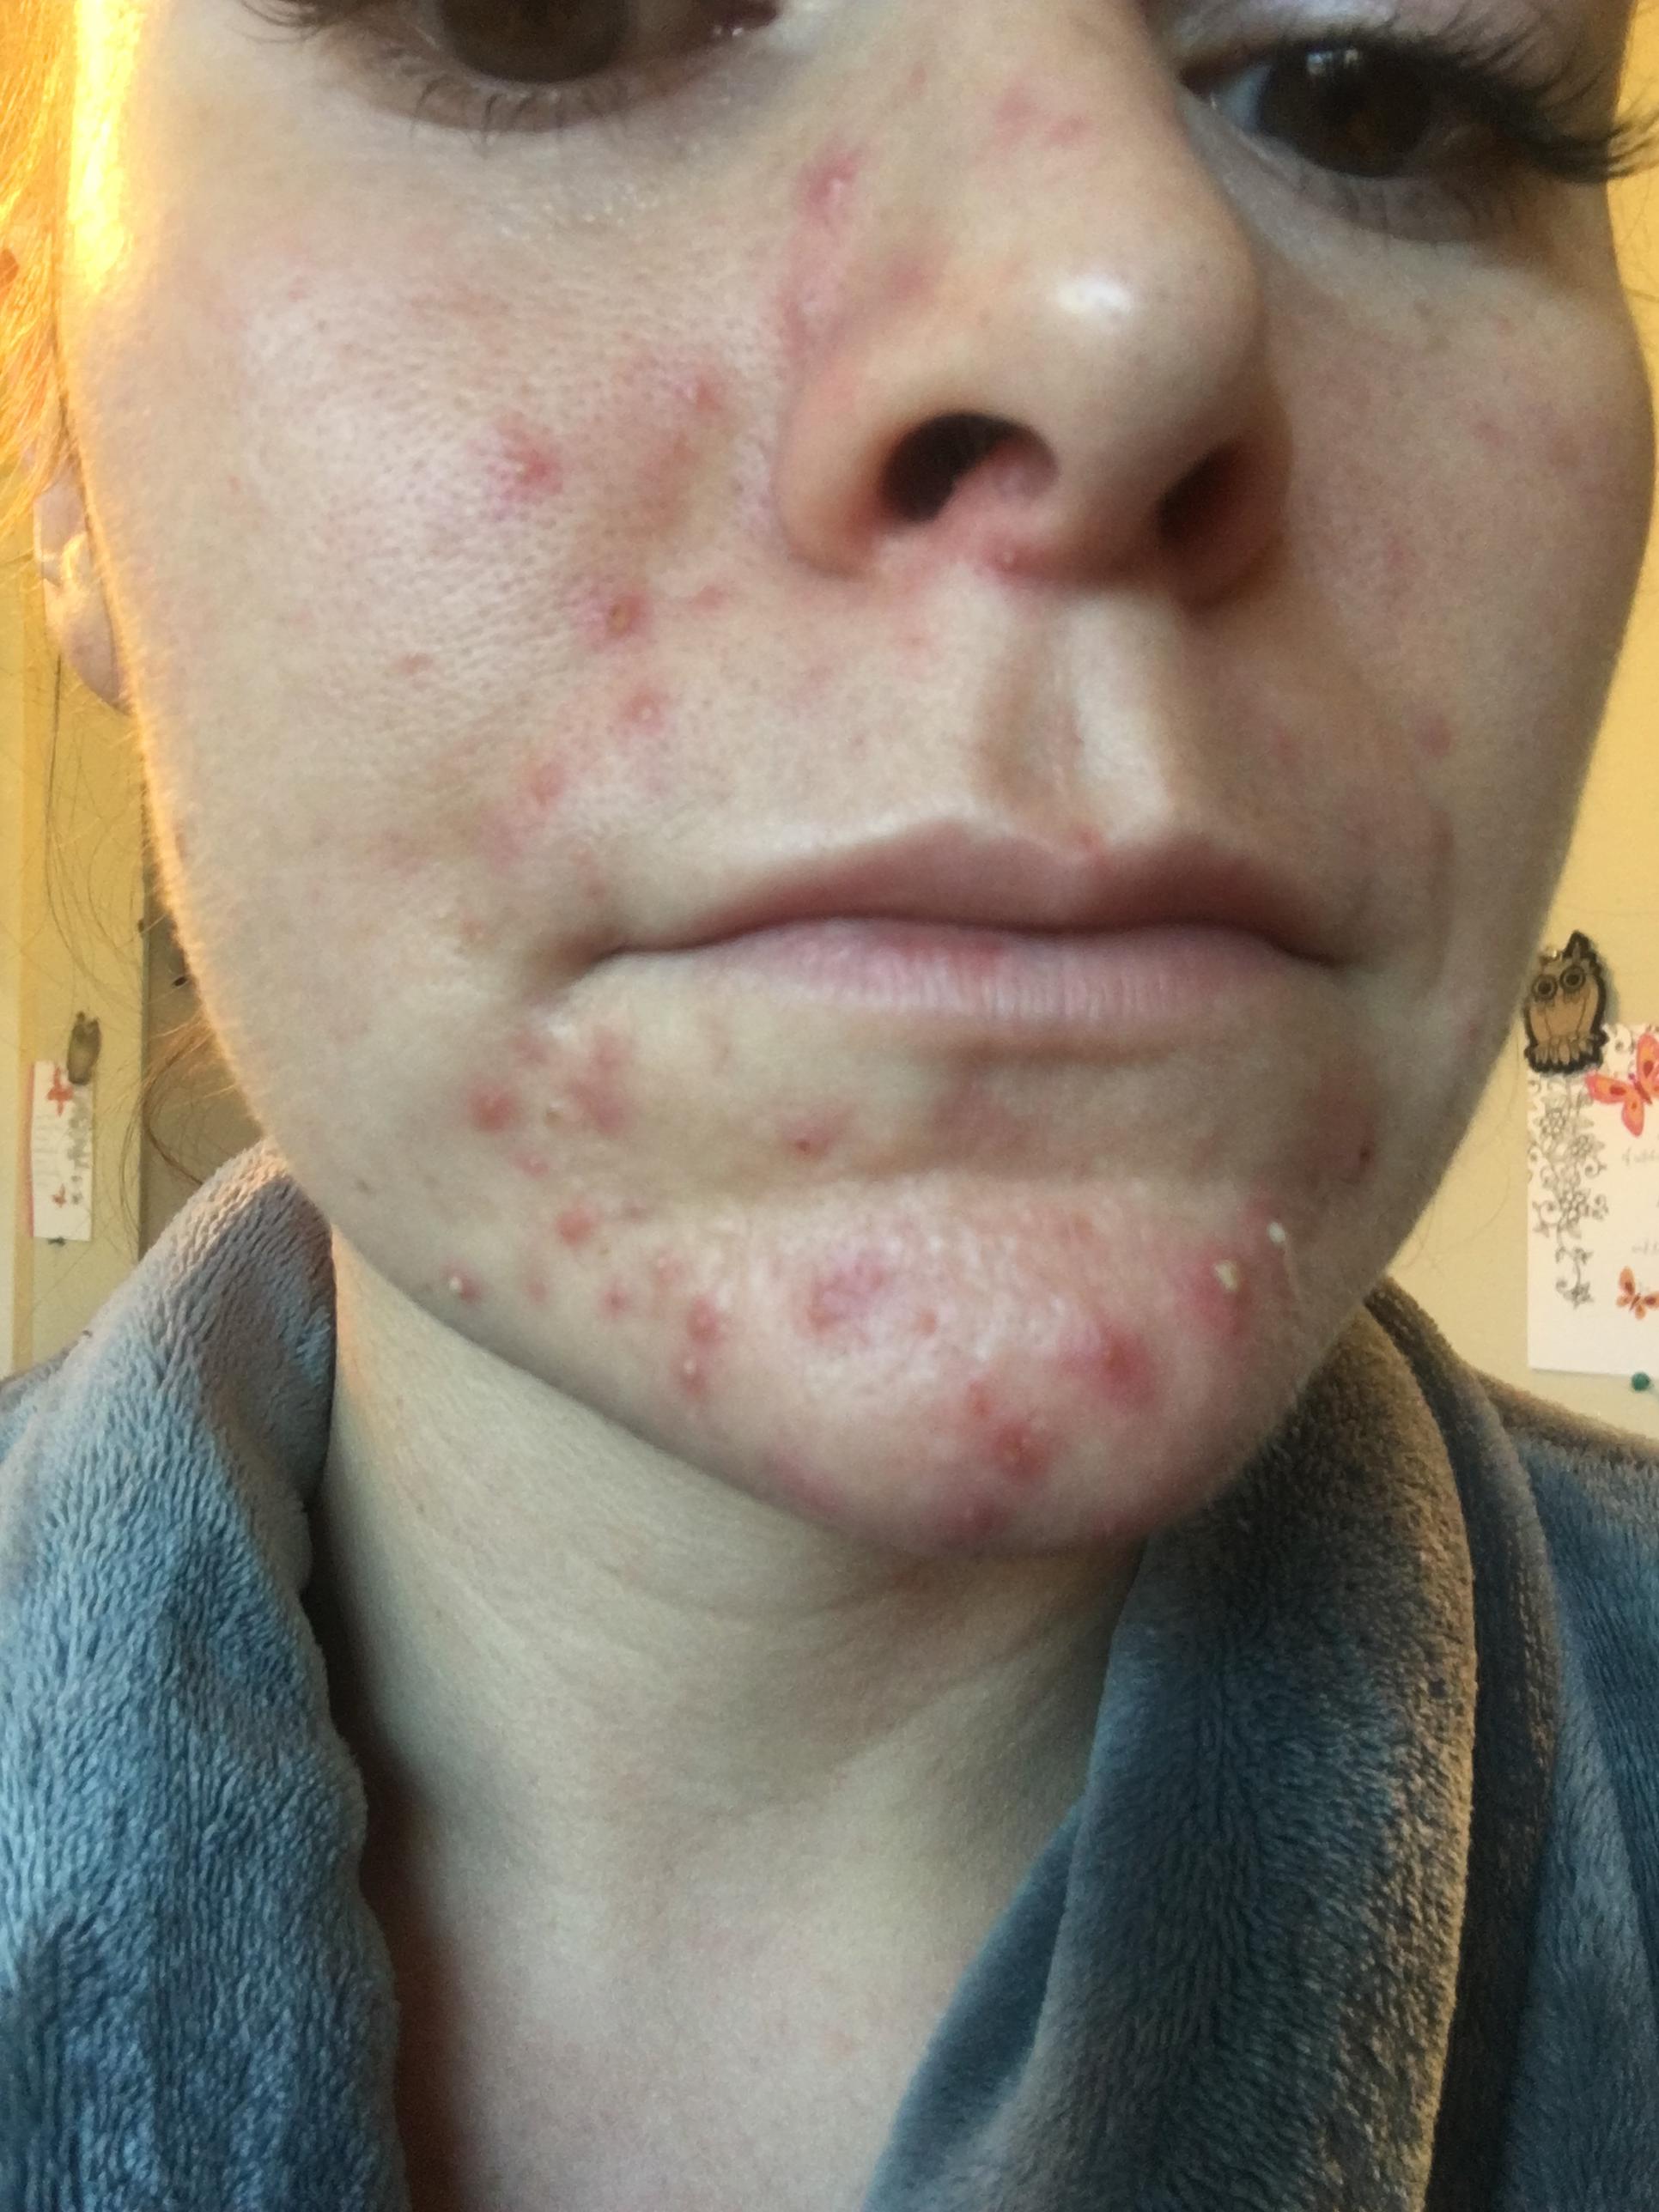 Cystic acne on chin 9 months after stopping Yasmin ...